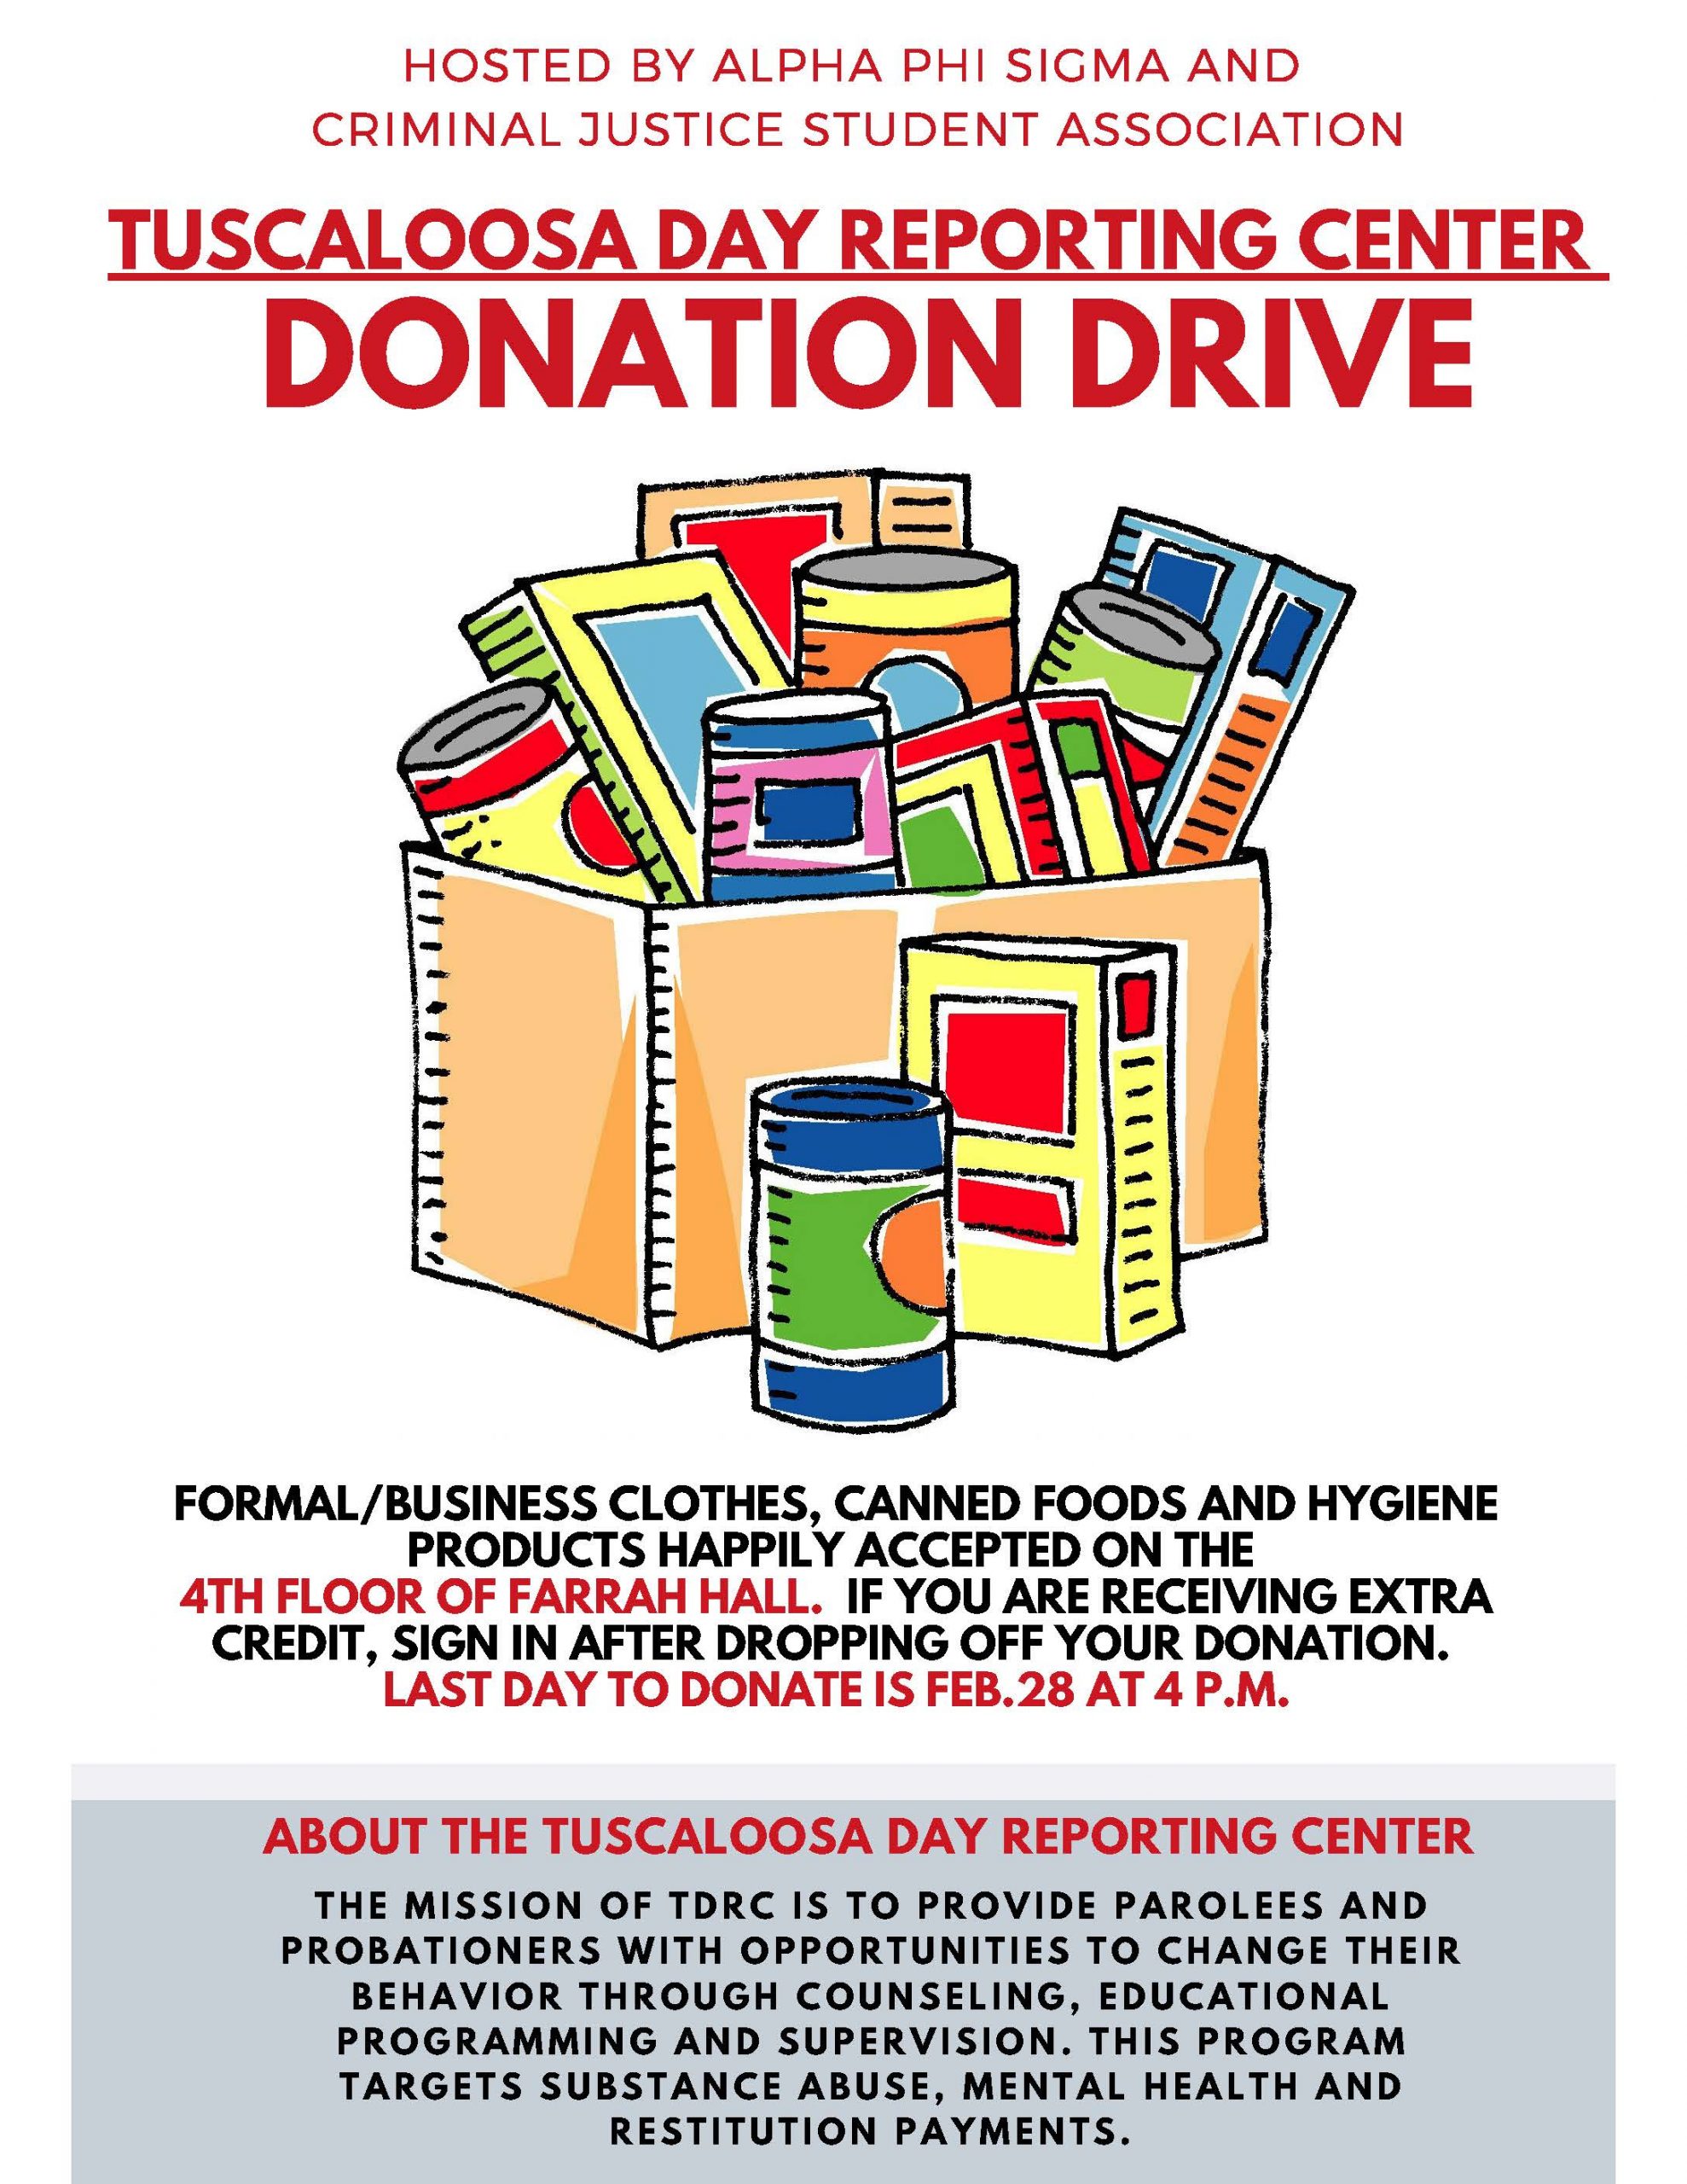 donation drive flyer